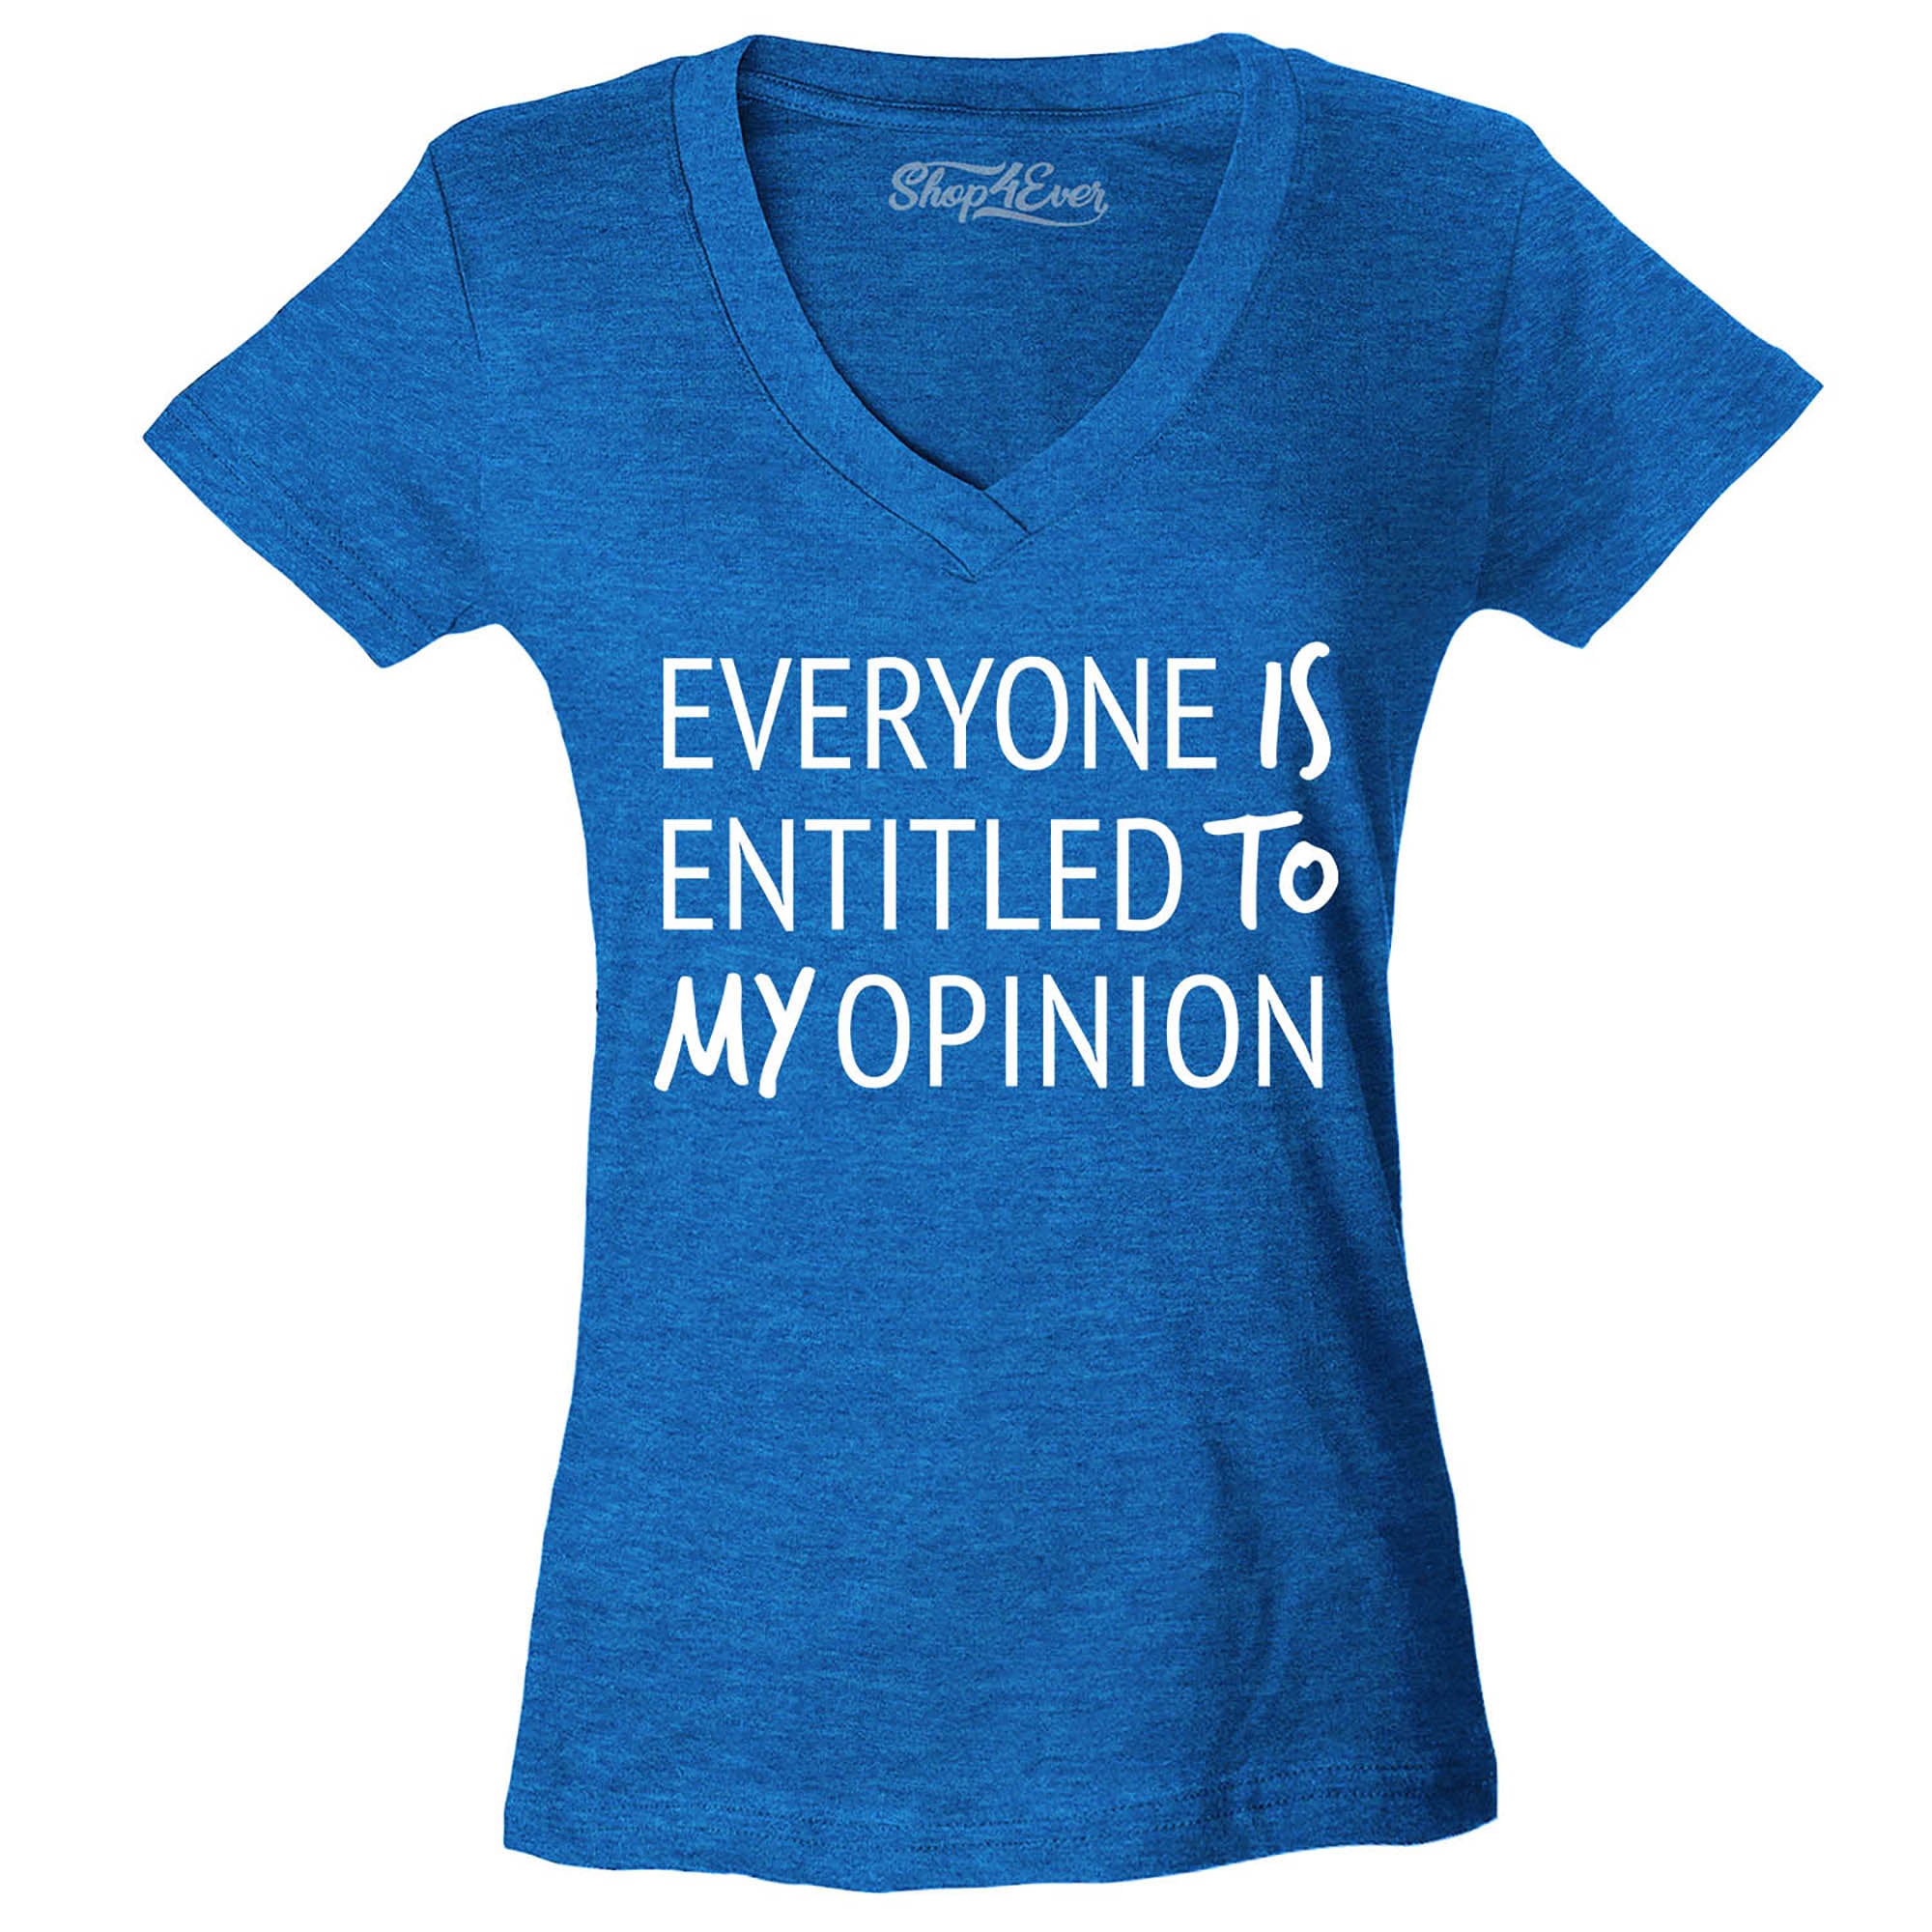 Everyone is Entitled to My Opinion Funny Sarcastic Women's V-Neck T-Shirt Slim Fit